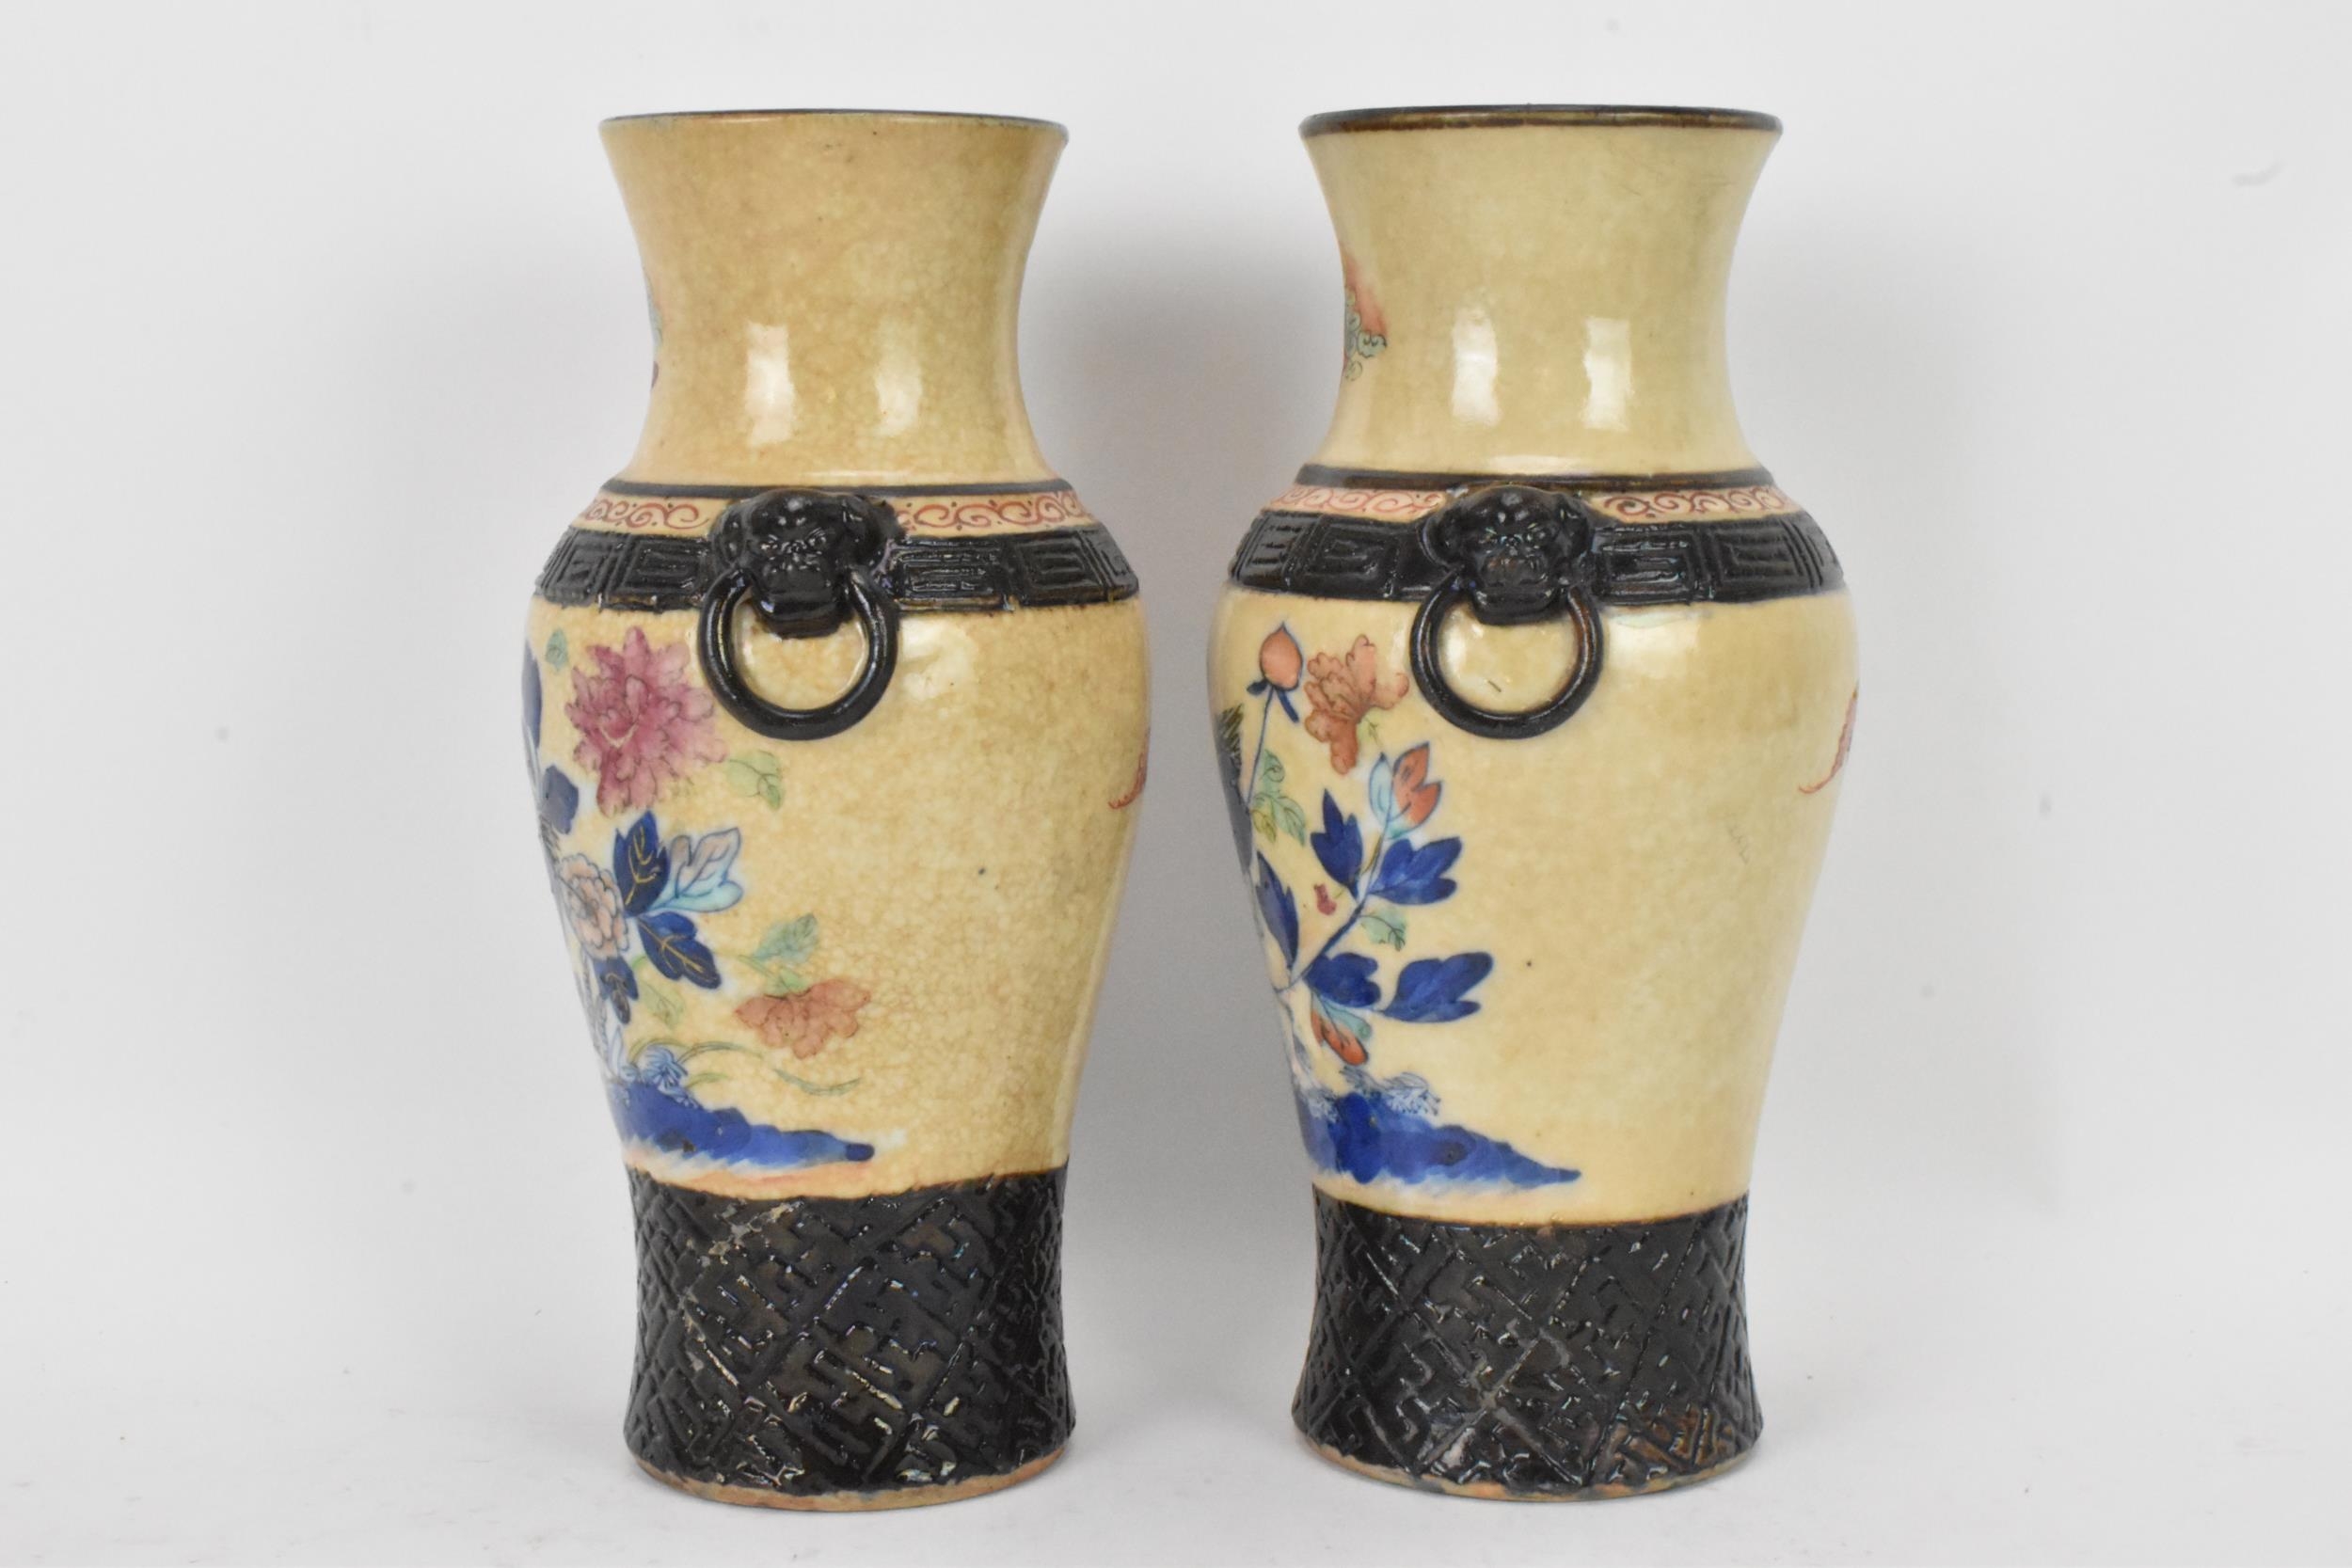 A pair of Chinese Nanking crackle glazed vases, Qing dynasty, late 19th century, baluster form - Image 2 of 7